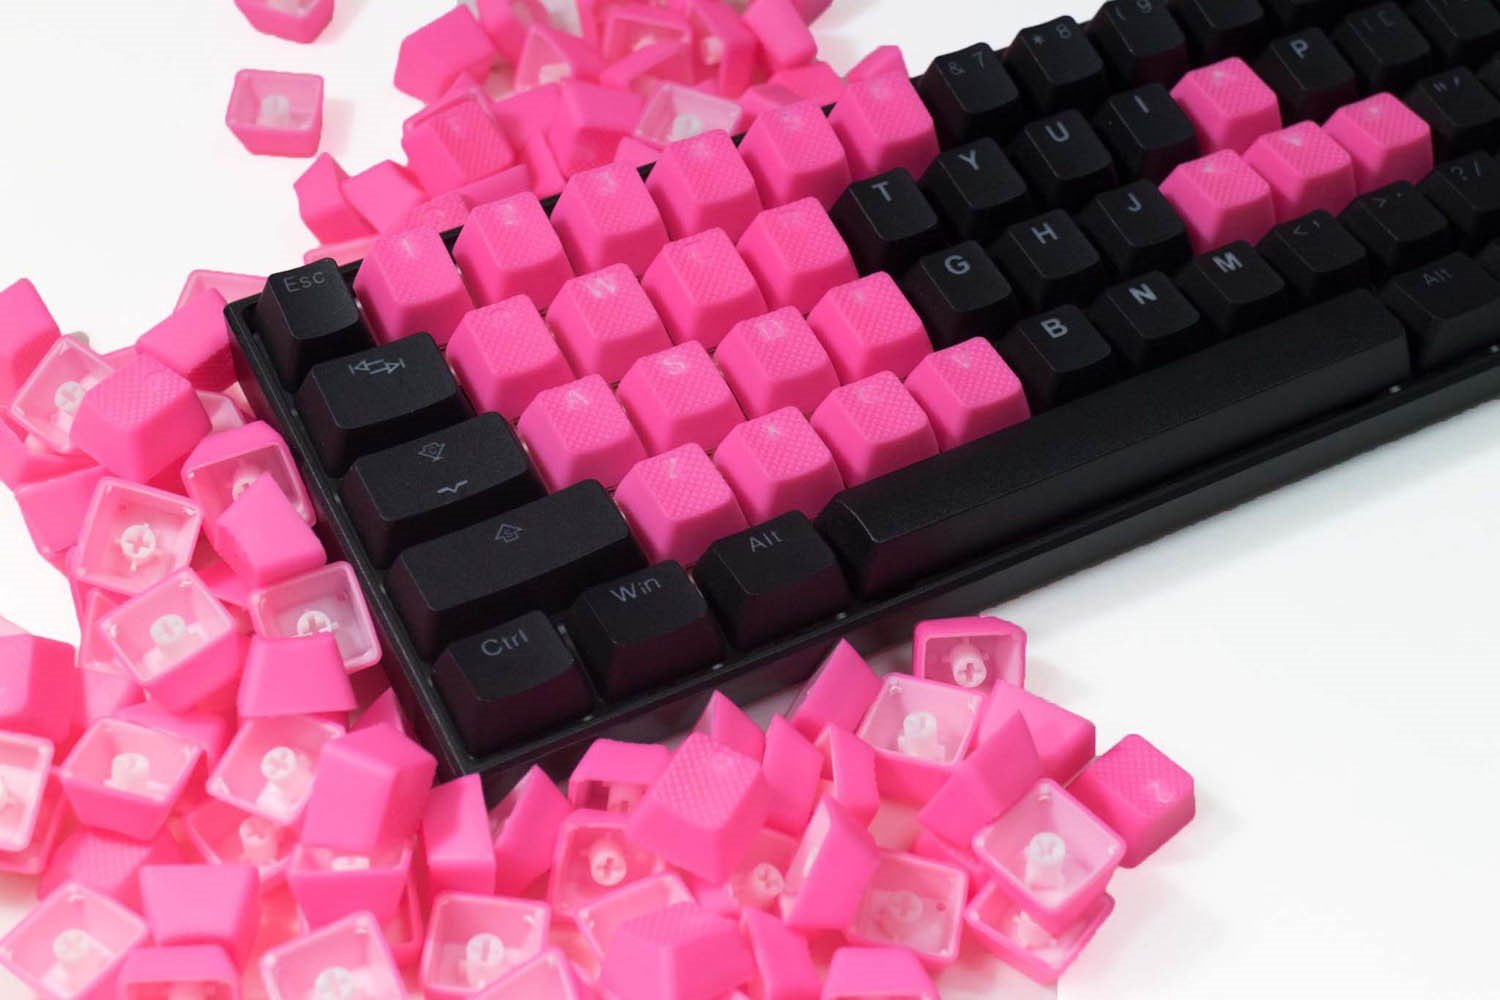 Tai-Hao TPR Rubber Backlit Double Shot Keycaps, 22 Keys in Neon Pink